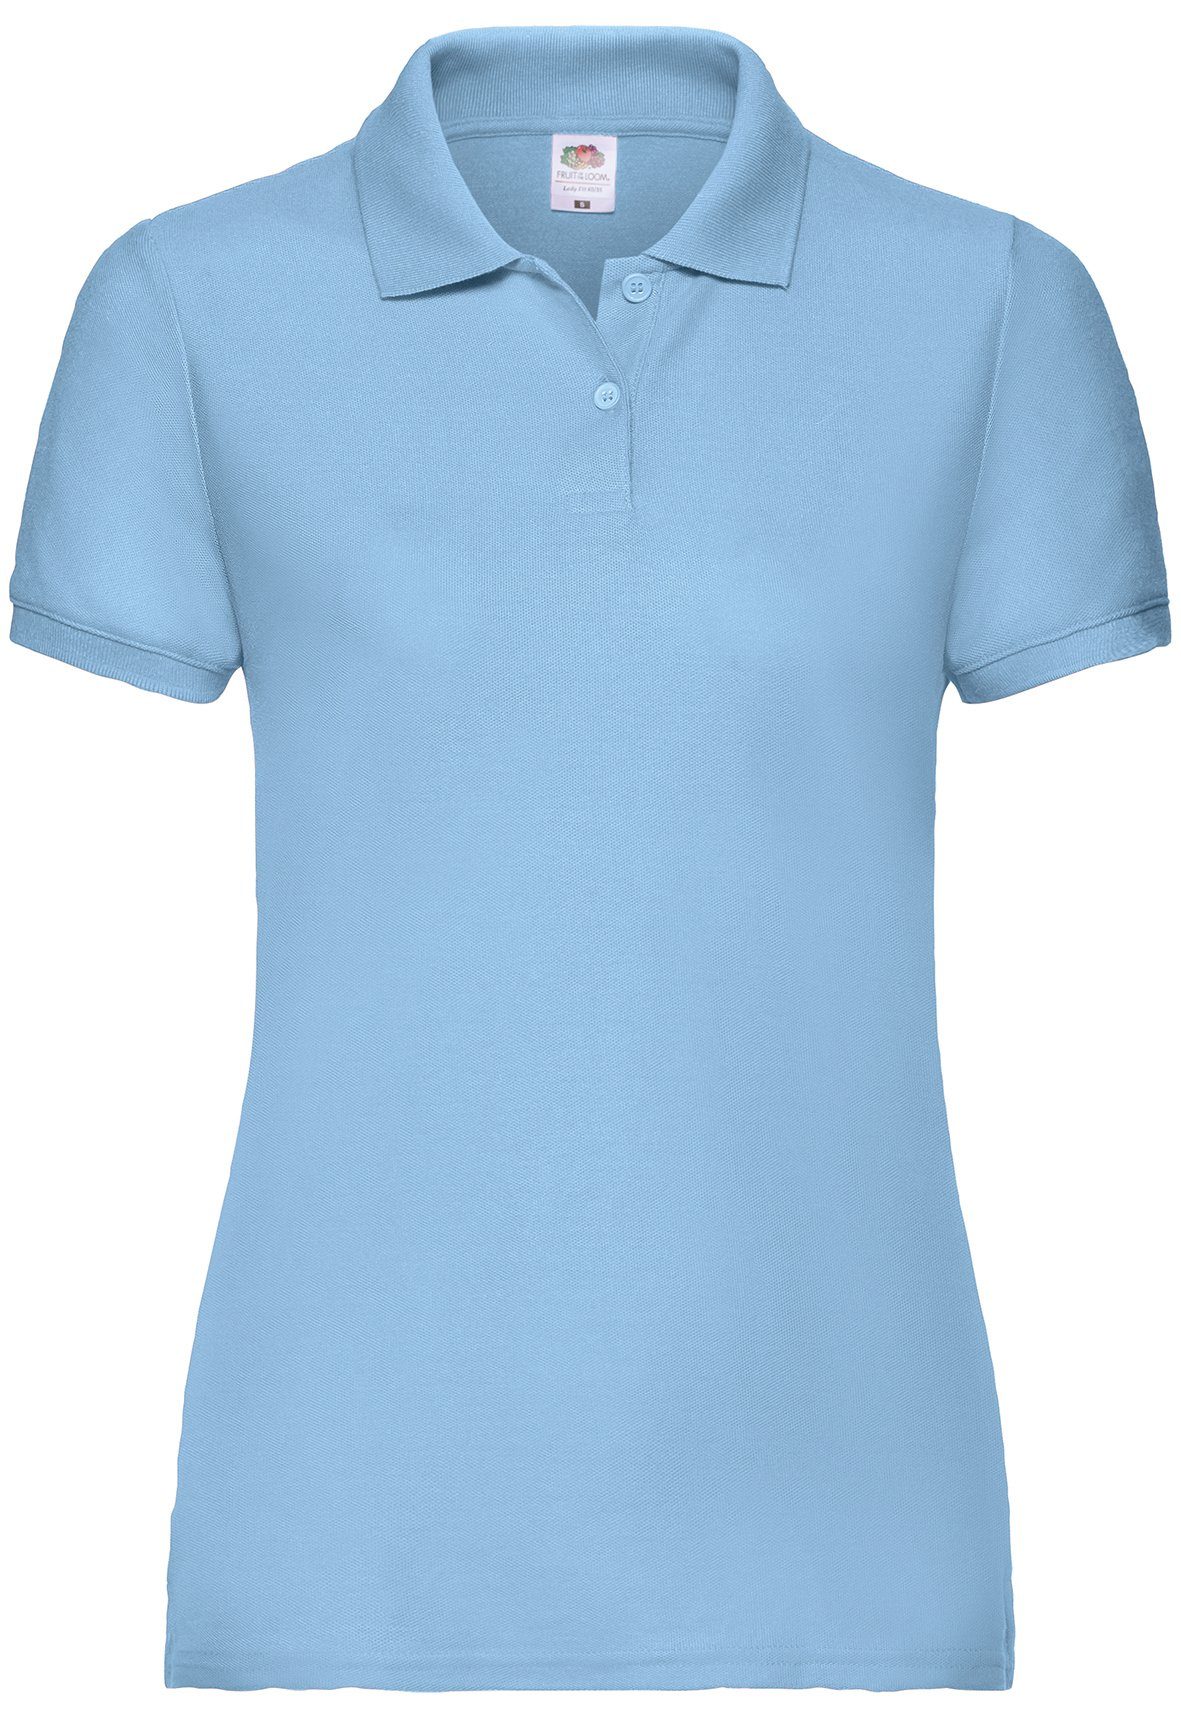 Fruit of the Loom Poloshirt Fruit of the Loom 65/35 Polo Lady-Fit pastellblau